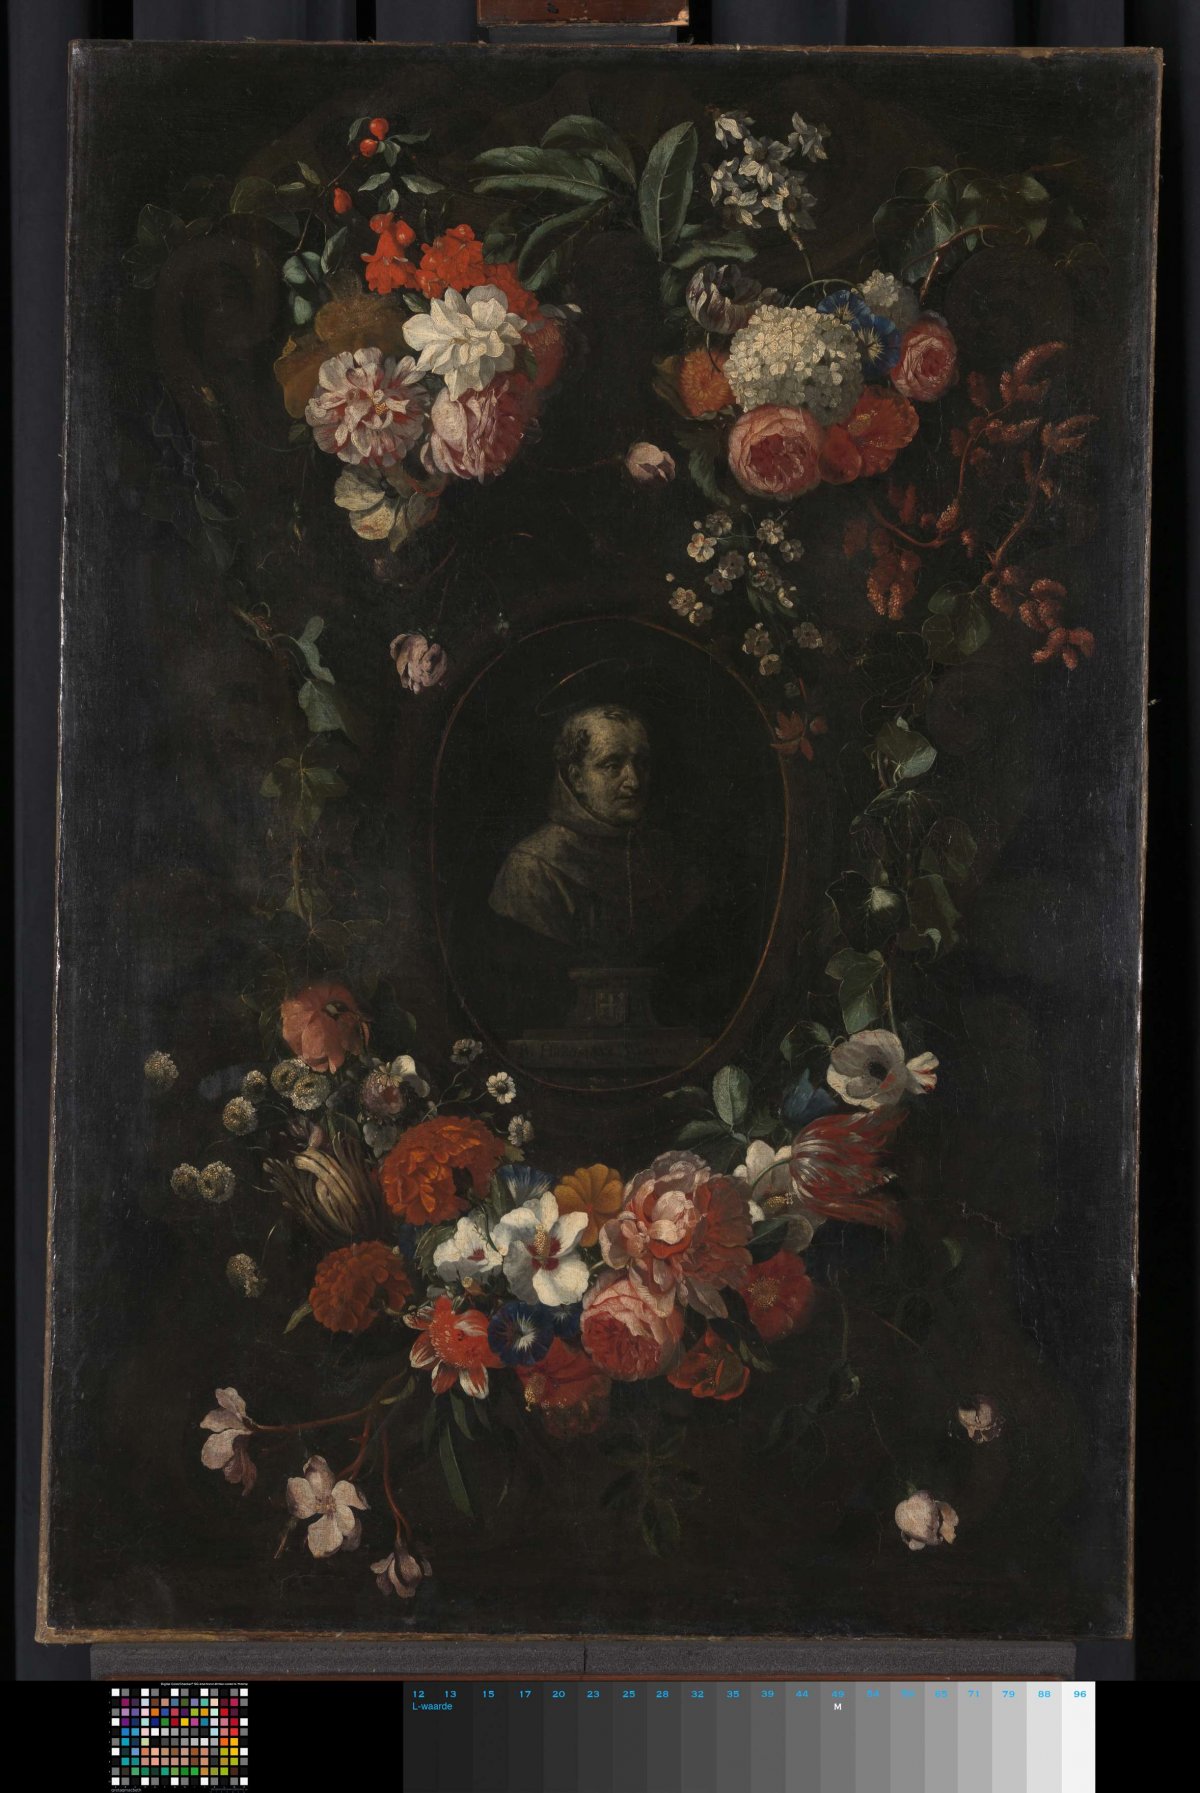 Feigned Sculpted Bust of the Blessed Hieronymus Werdanus Set in a Feigned Stone Cartouche, Decorated with a Swag and Two Bunches of Flowers, Wouter Gysaerts, 1676